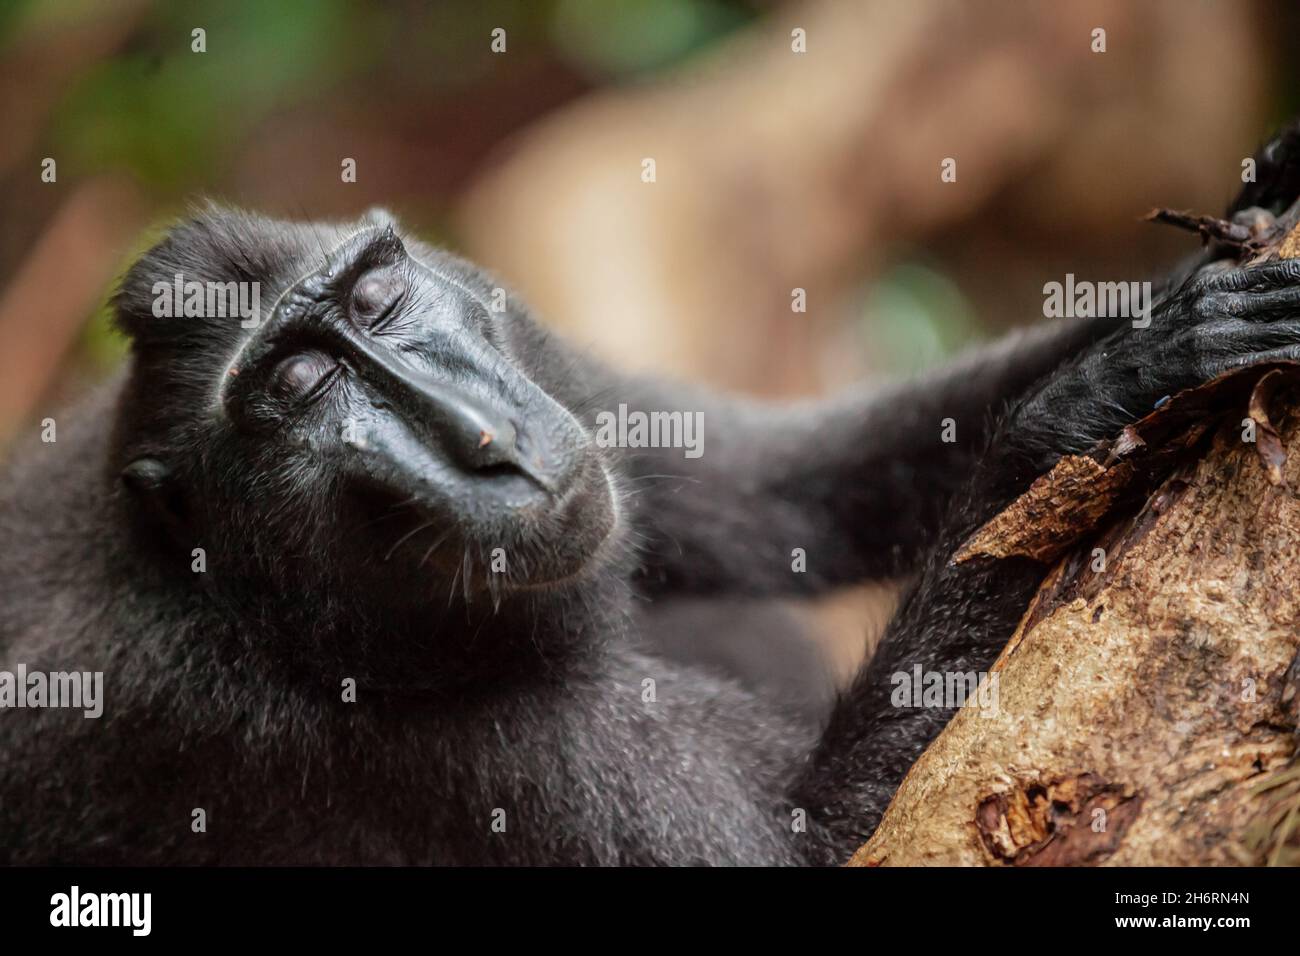 Portrait Crested black macaque with its eyes closed, Tangkoko National Park, Indonesia Stock Photo